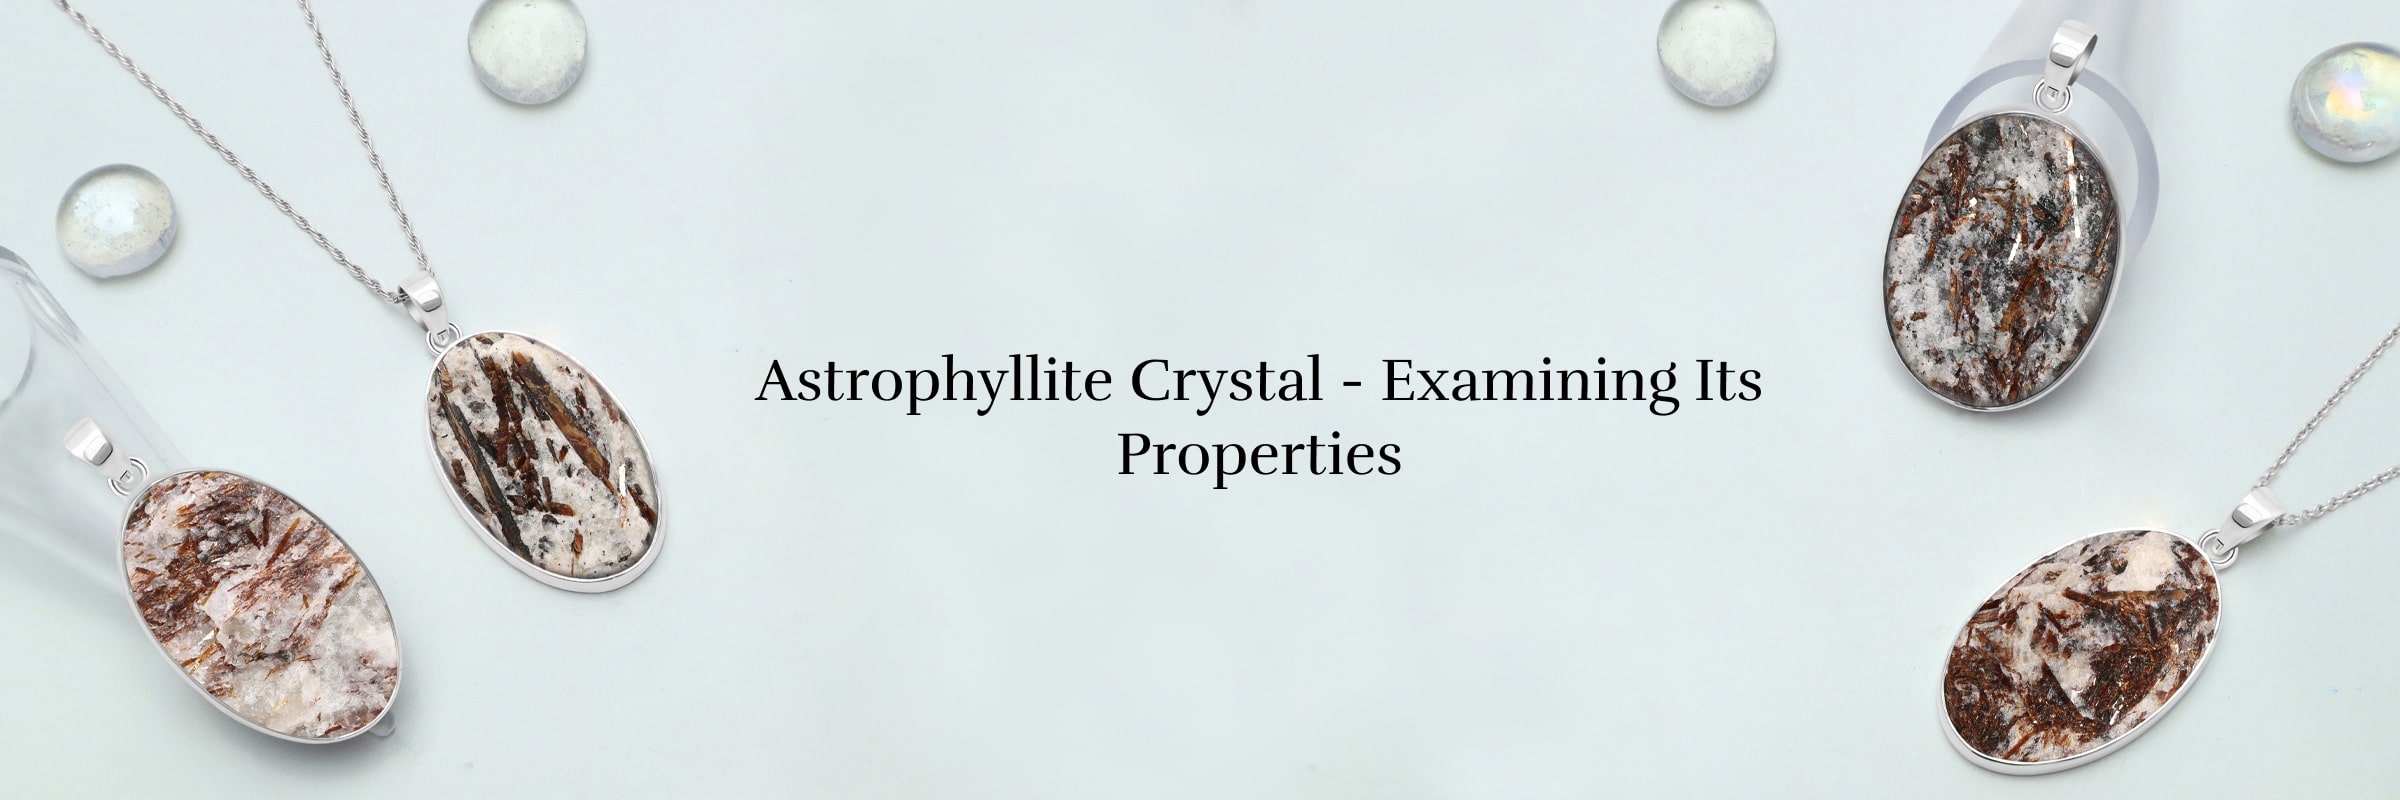 Physical Properties of Astrophyllite Crystal